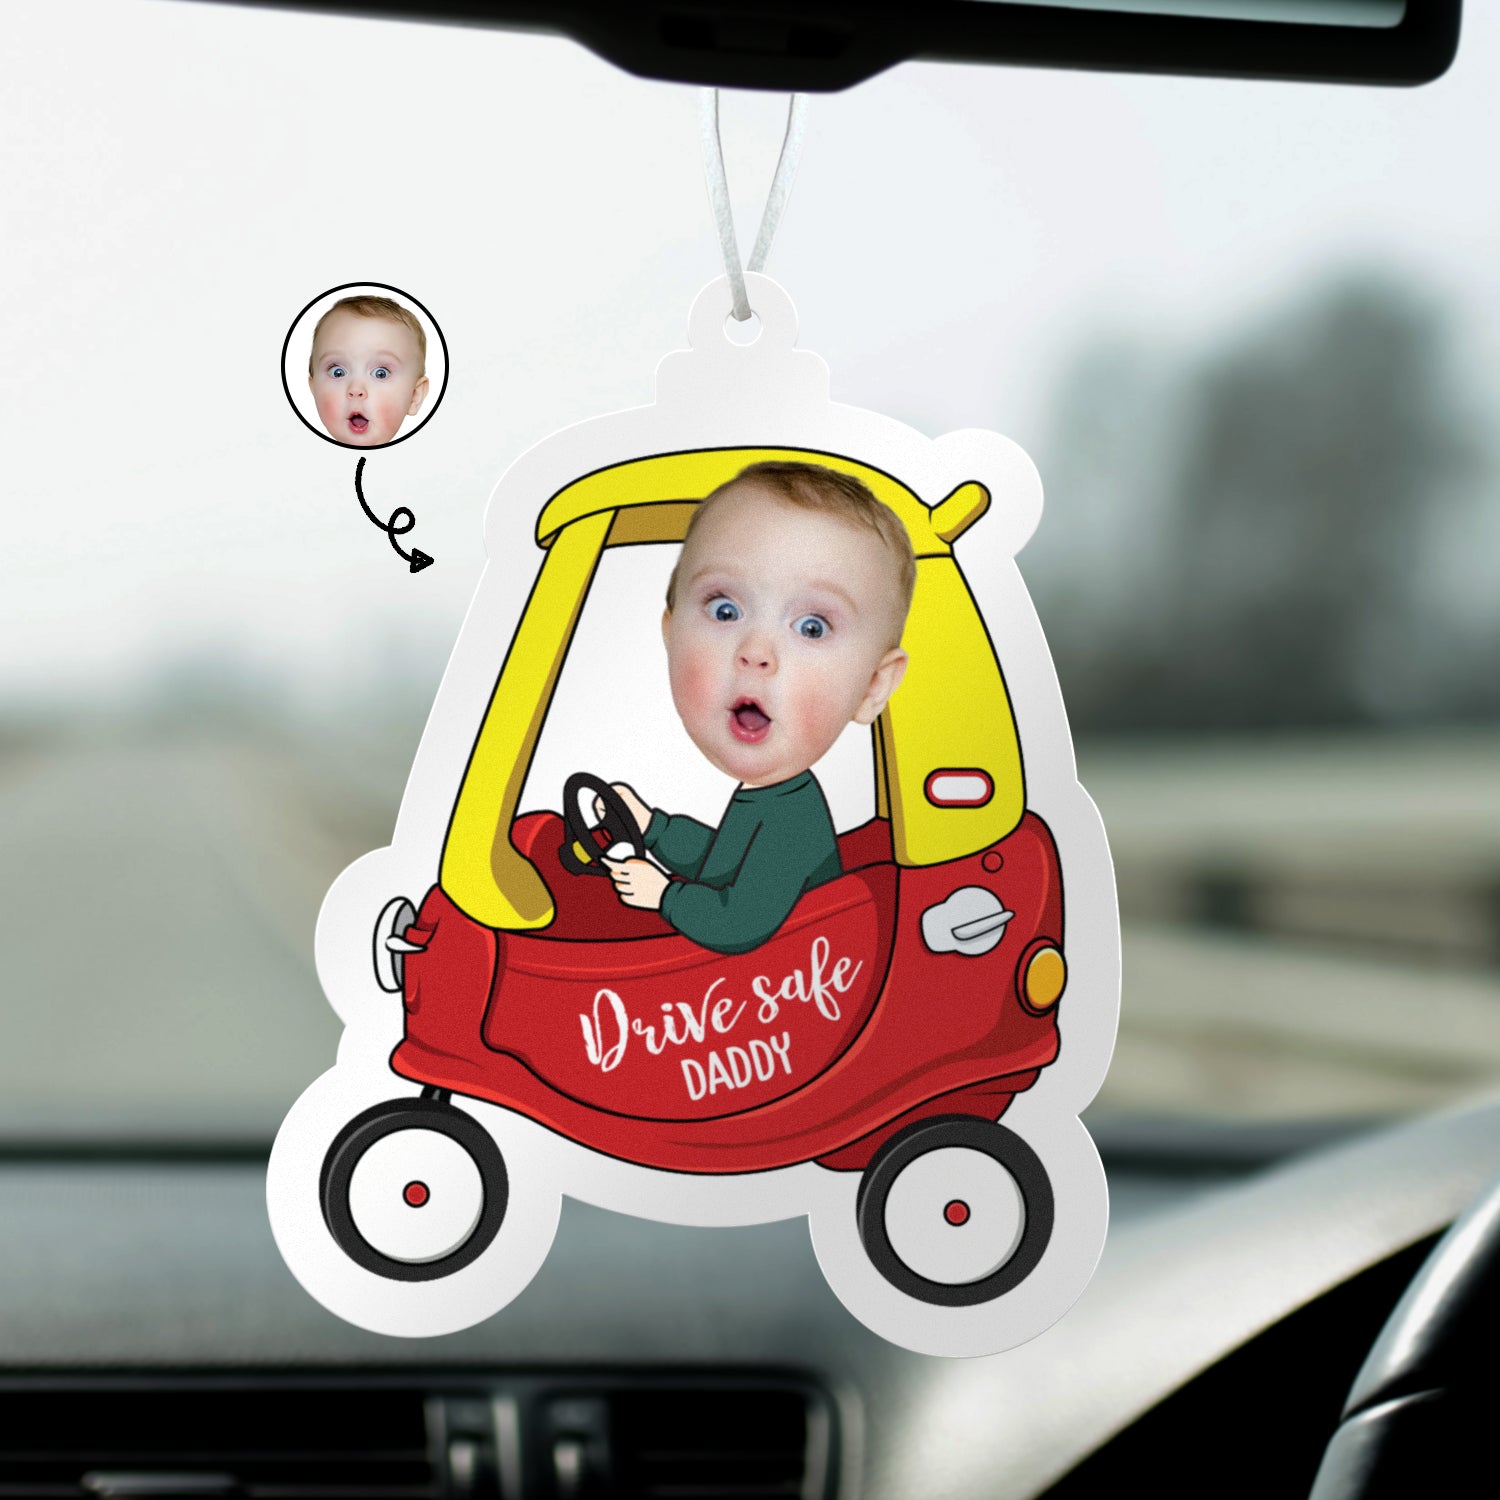 Custom Photo Drive Safe Daddy - Birthday, Loving Gift For Dad, Father, Papa, Grandpa - Personalized Photo Air Freshener